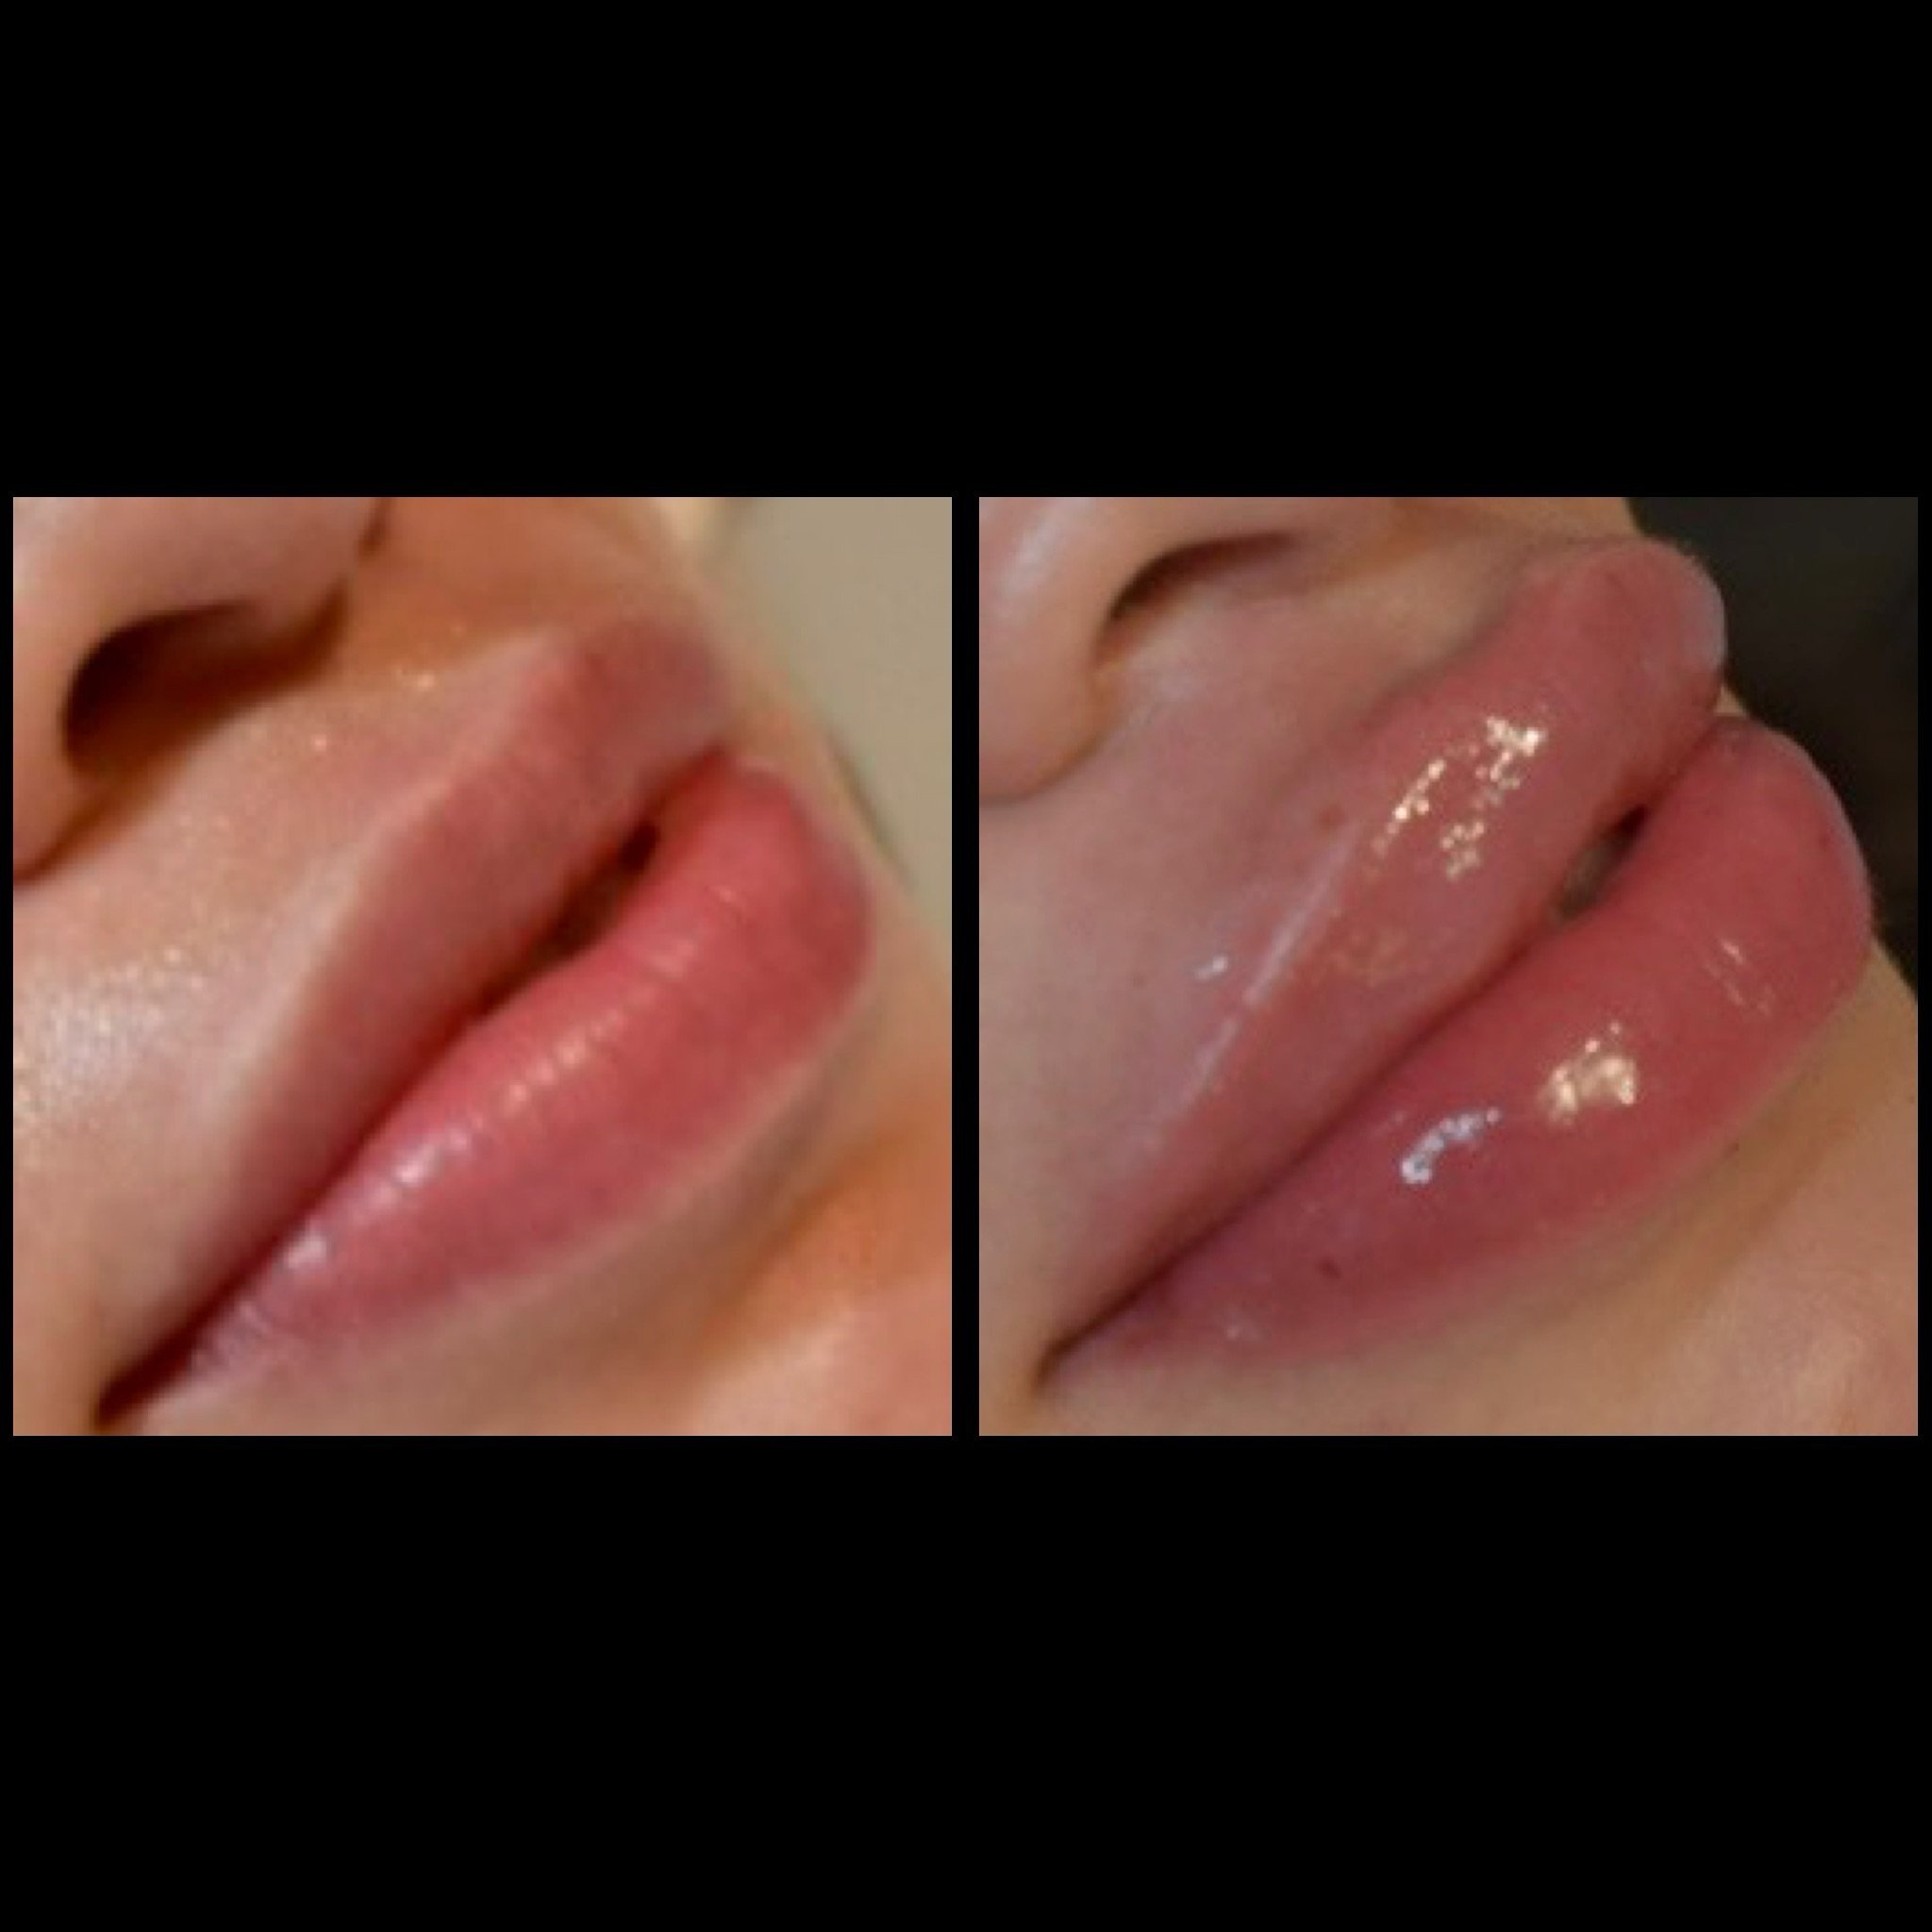 Using Revanesse Lips to hydrate and plump her lips.  Filler lasts 9-12 months. 👄💉😘

Text 551-355-1450 or Book online at www.linealounge.com

#lipfillerbeforeandafter#lipfiller#lipplump#lipaugmentation#revanesselips#lipinjections#dermalfillerslips#